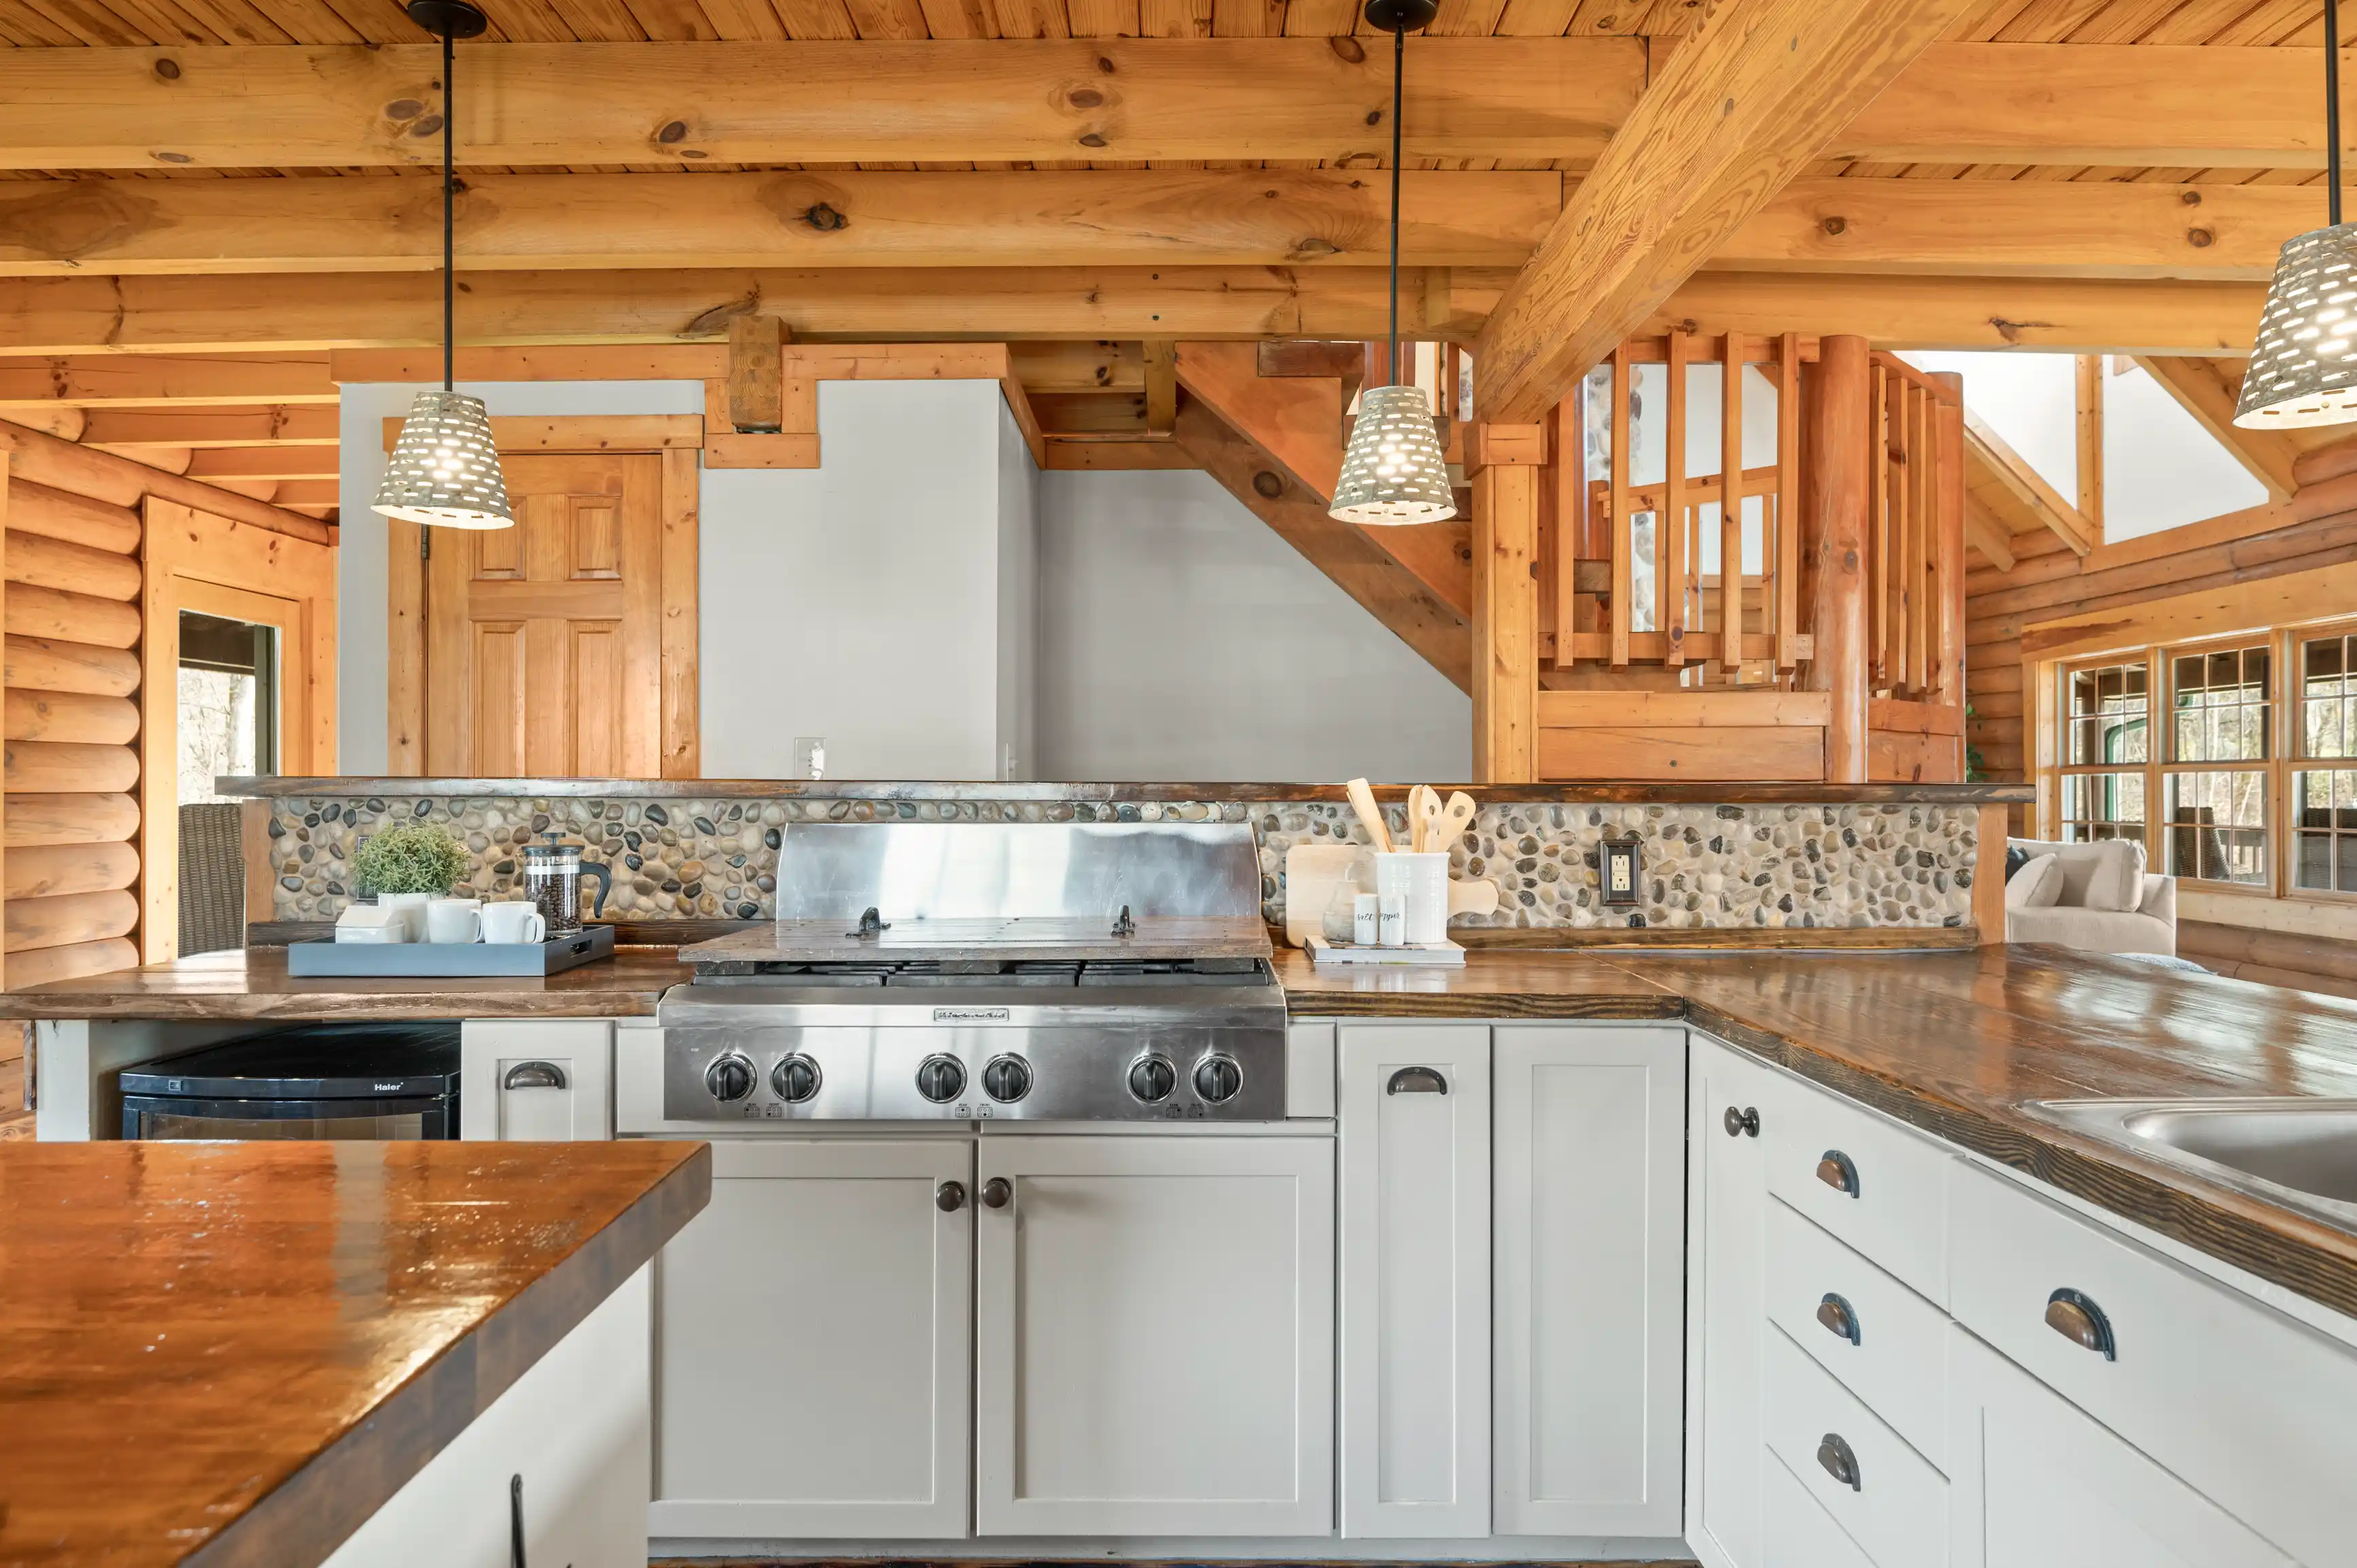 Rustic wooden cabin kitchen interior with log construction, stone backsplash, stainless steel stove, wooden countertops, and hanging pendant lights.